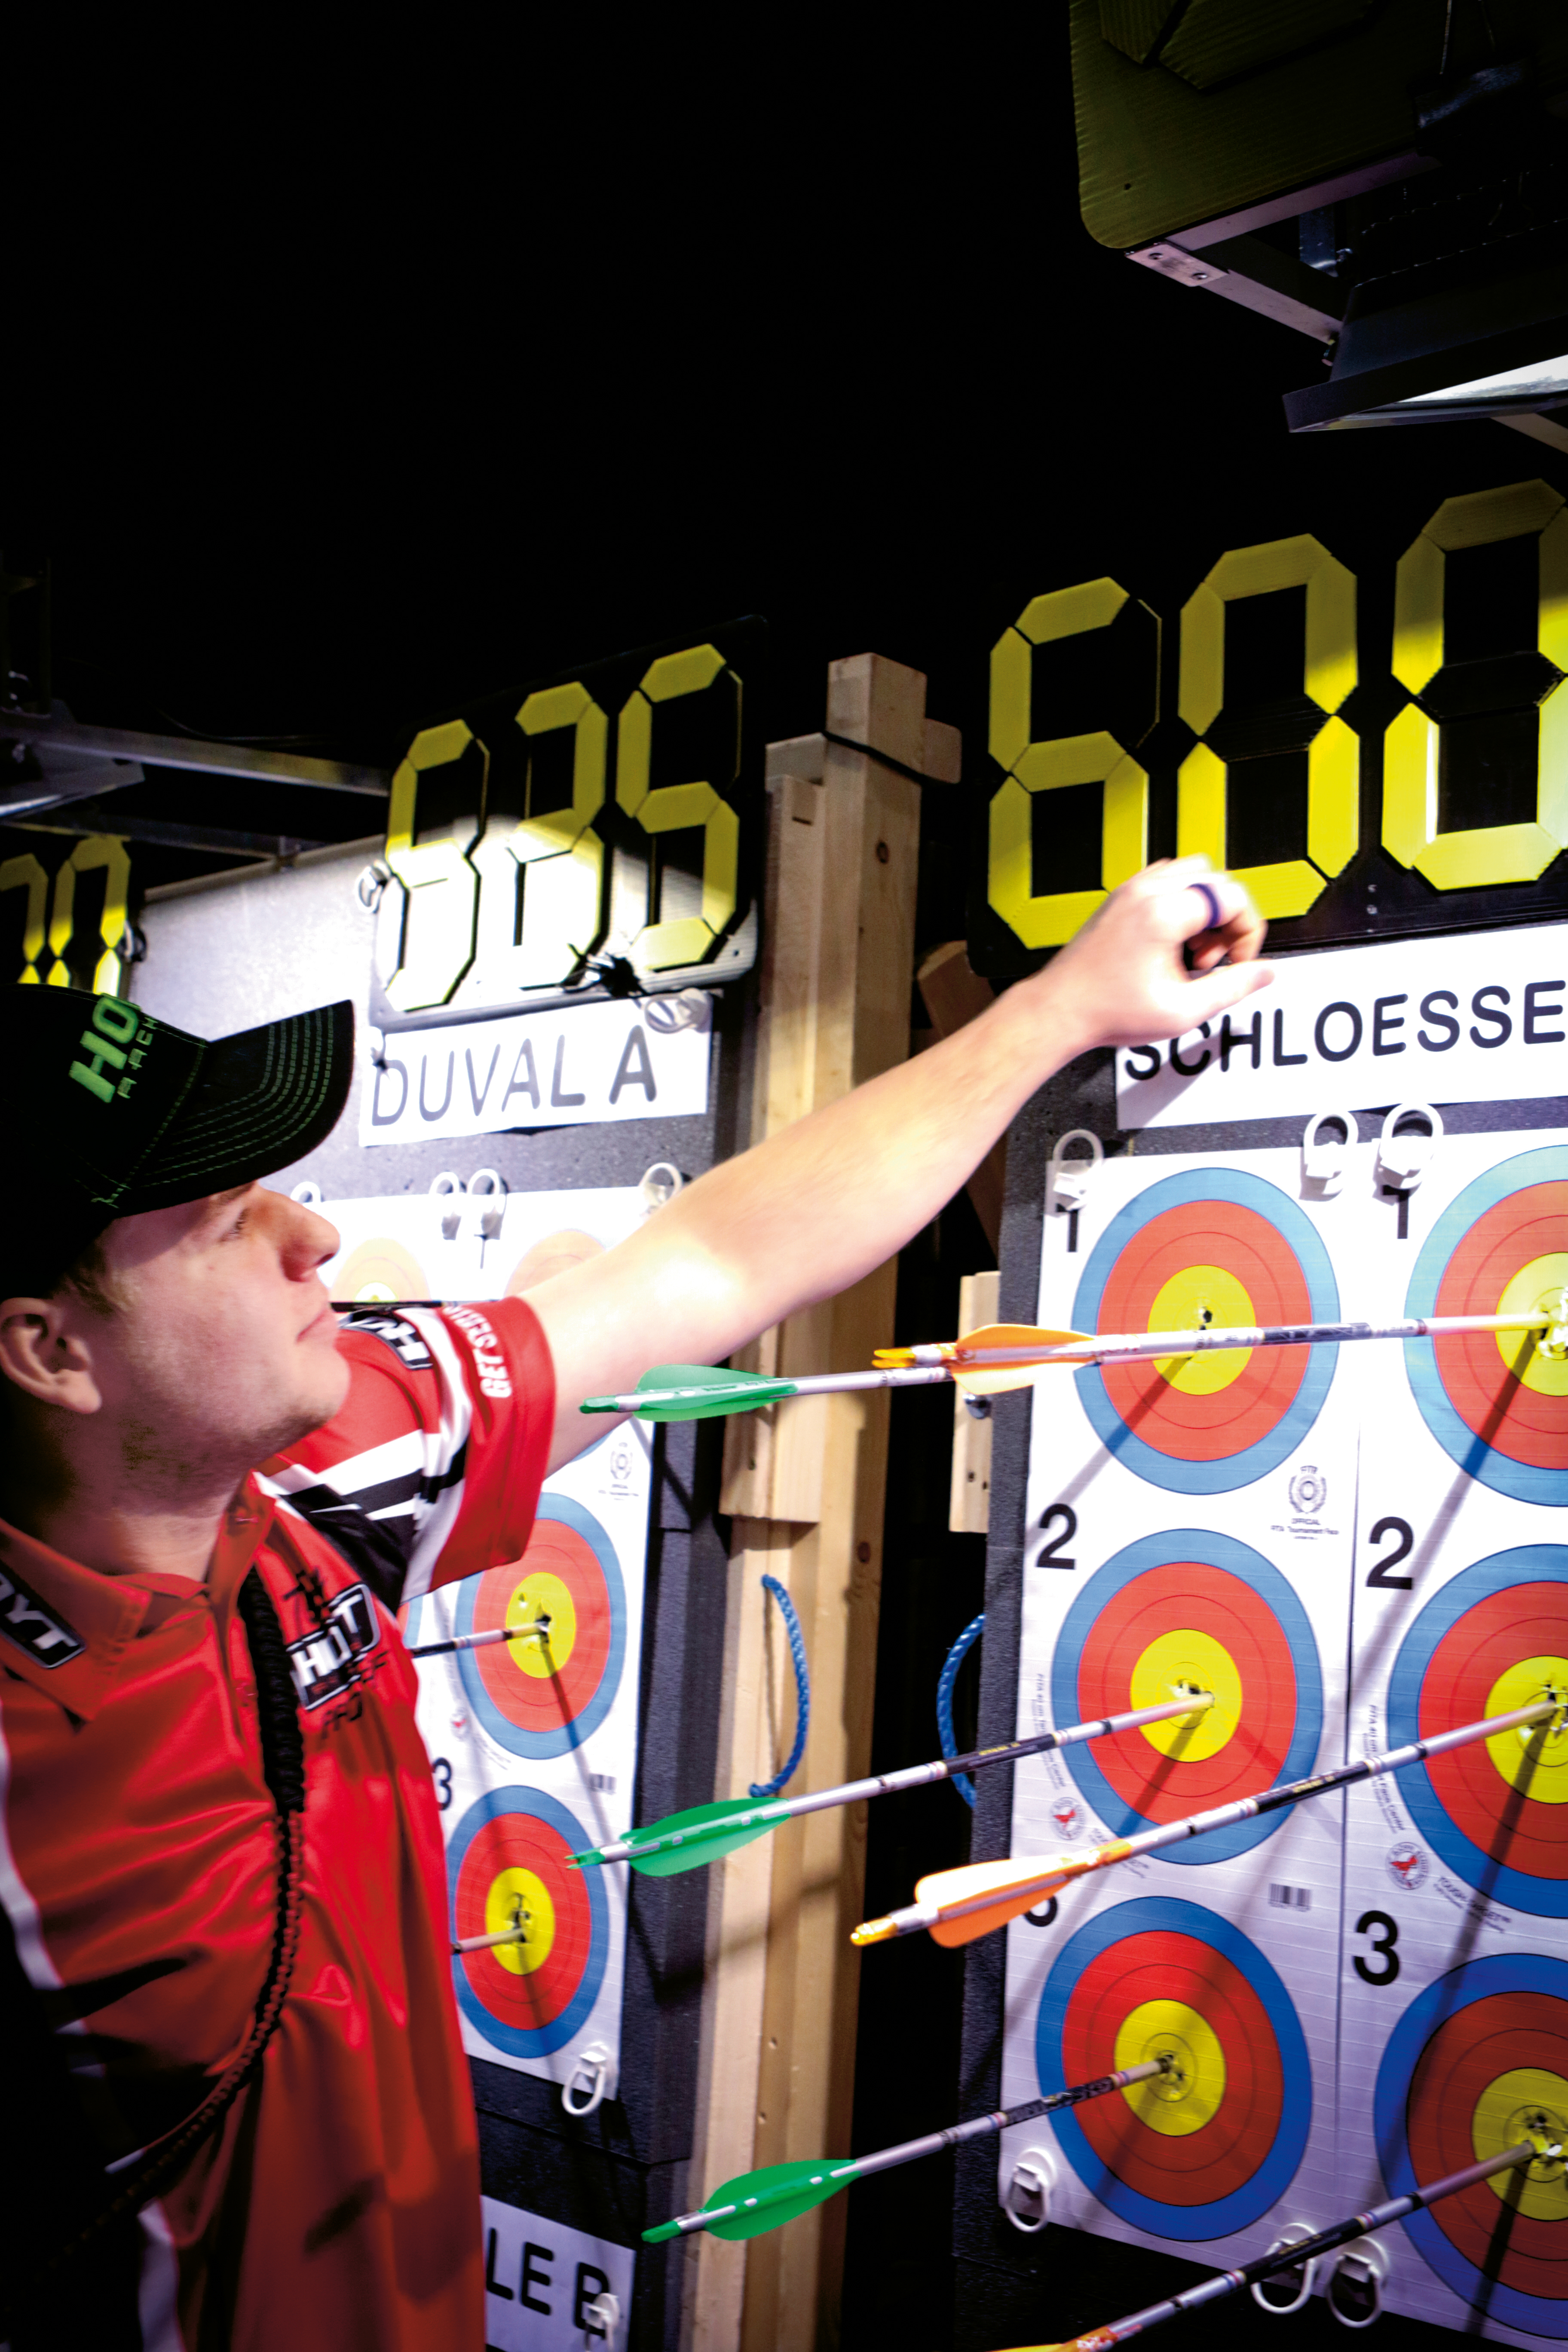 NIMES, FRANCE | 24 JANUARY 2015 | Mike Schloesser sets a perfect world record of 600 at Nimes 2015. (Photo by World Archery / Dean Alberga) | Mike Schloesser